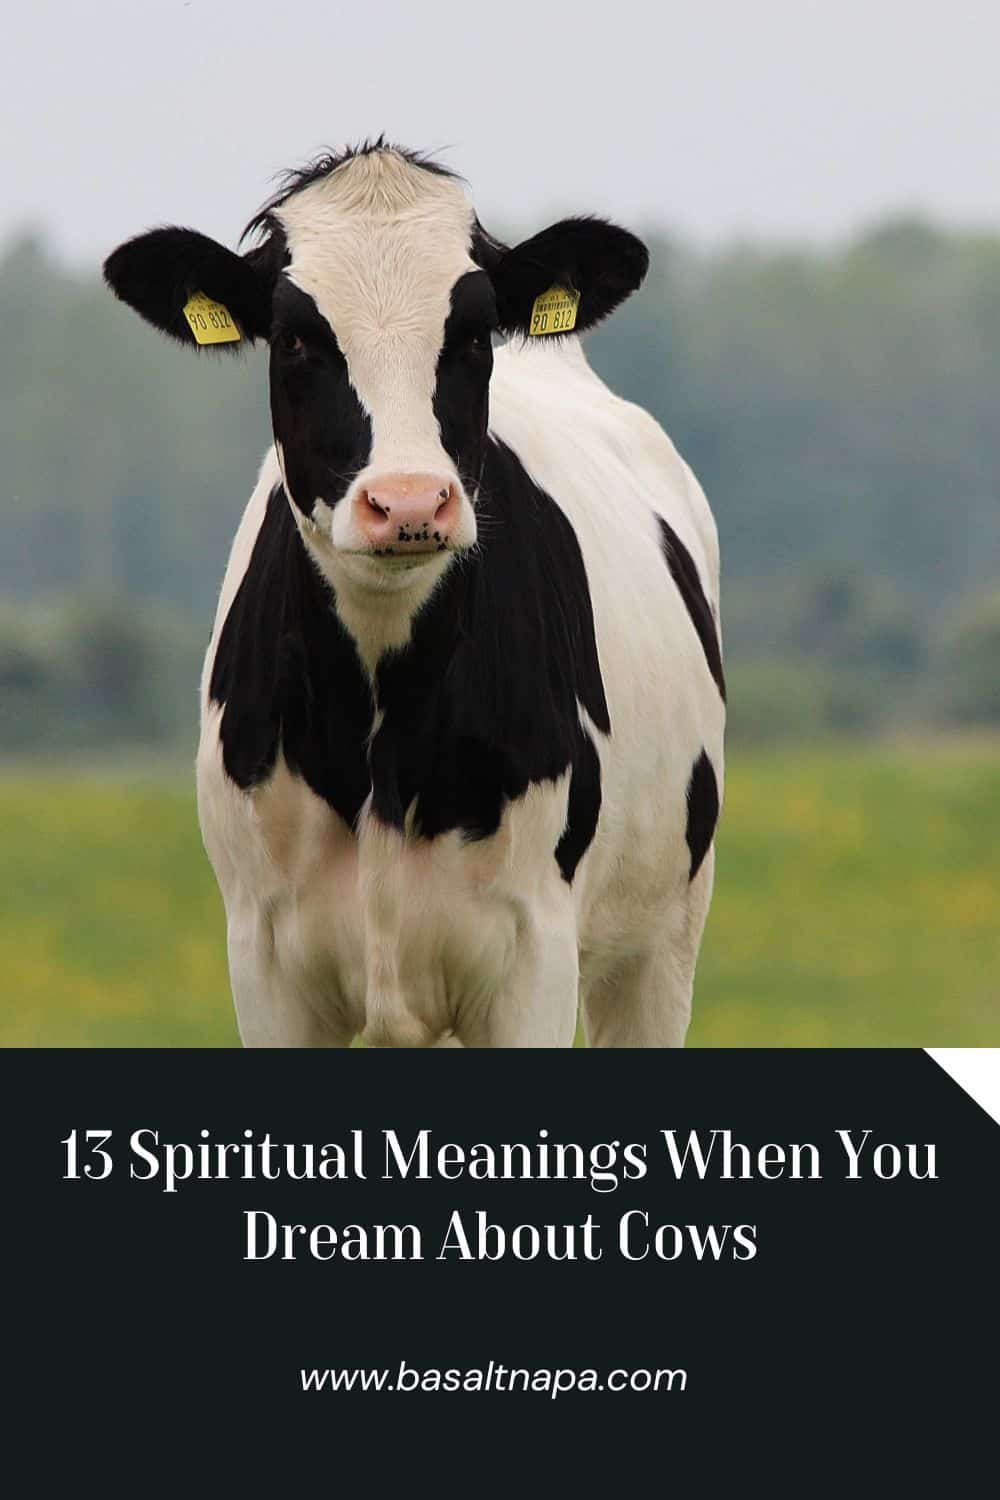 Spiritual Meanings of Dreams About Cows